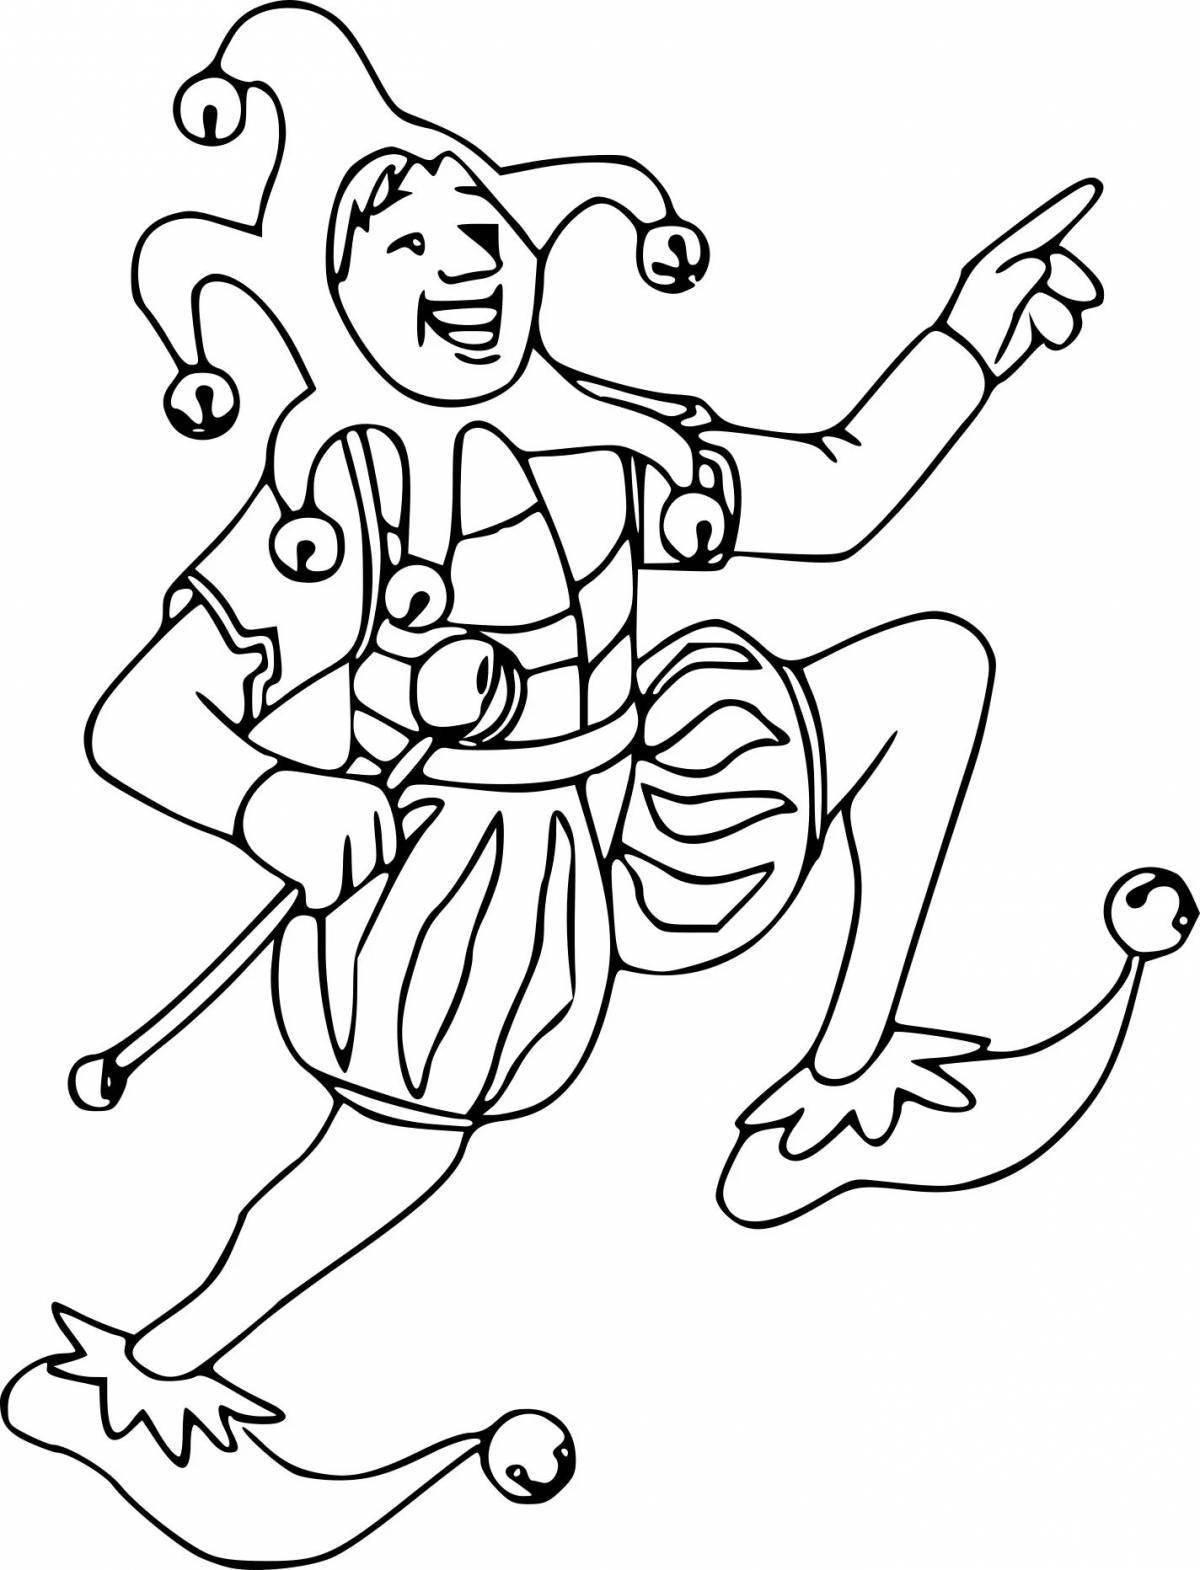 Courageous jester coloring page